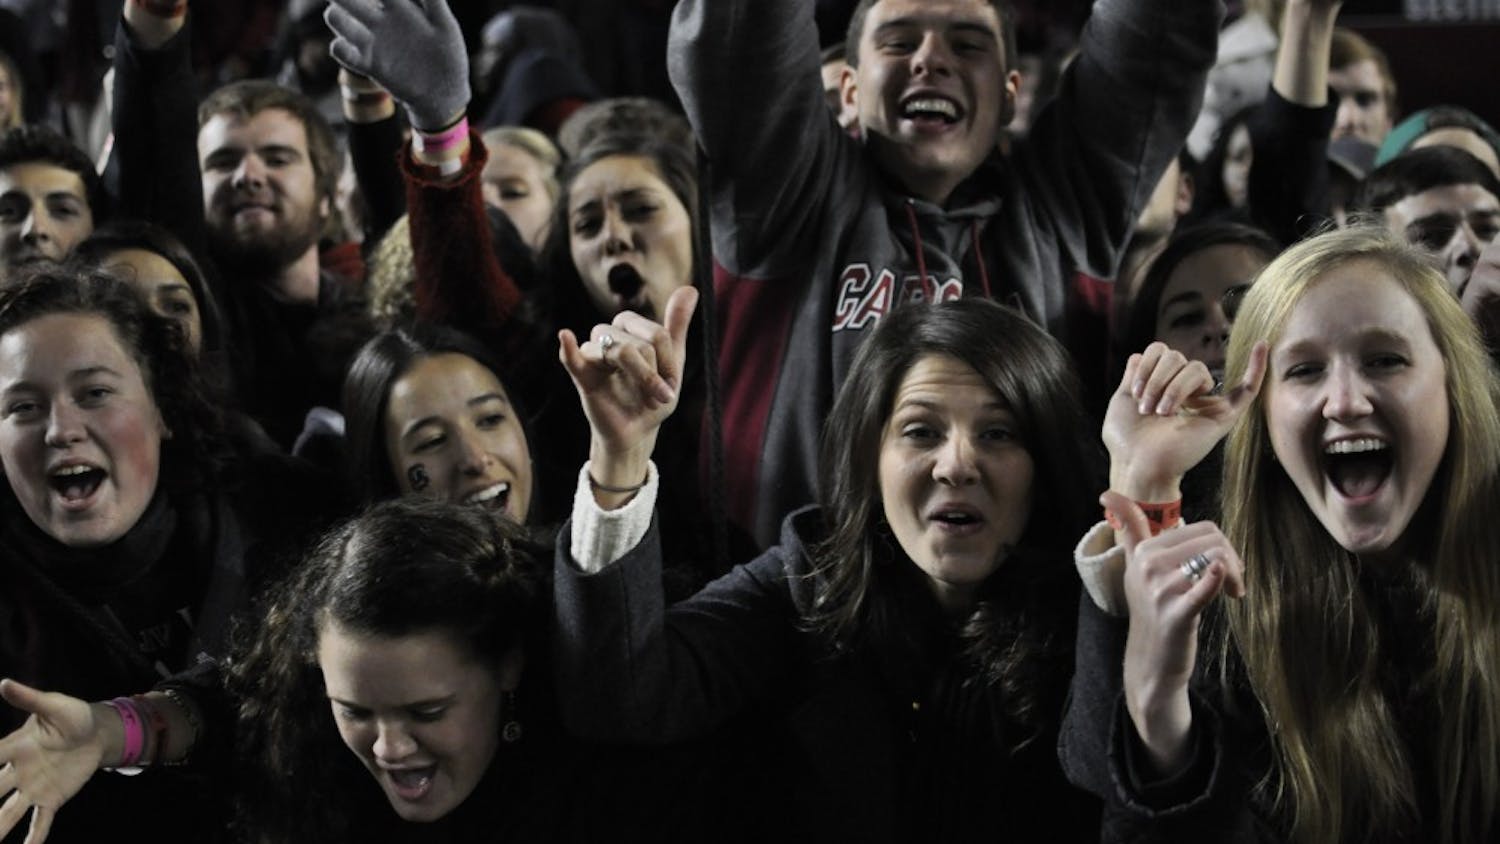 Students can earn loyalty points at games, pep rallies and other events.